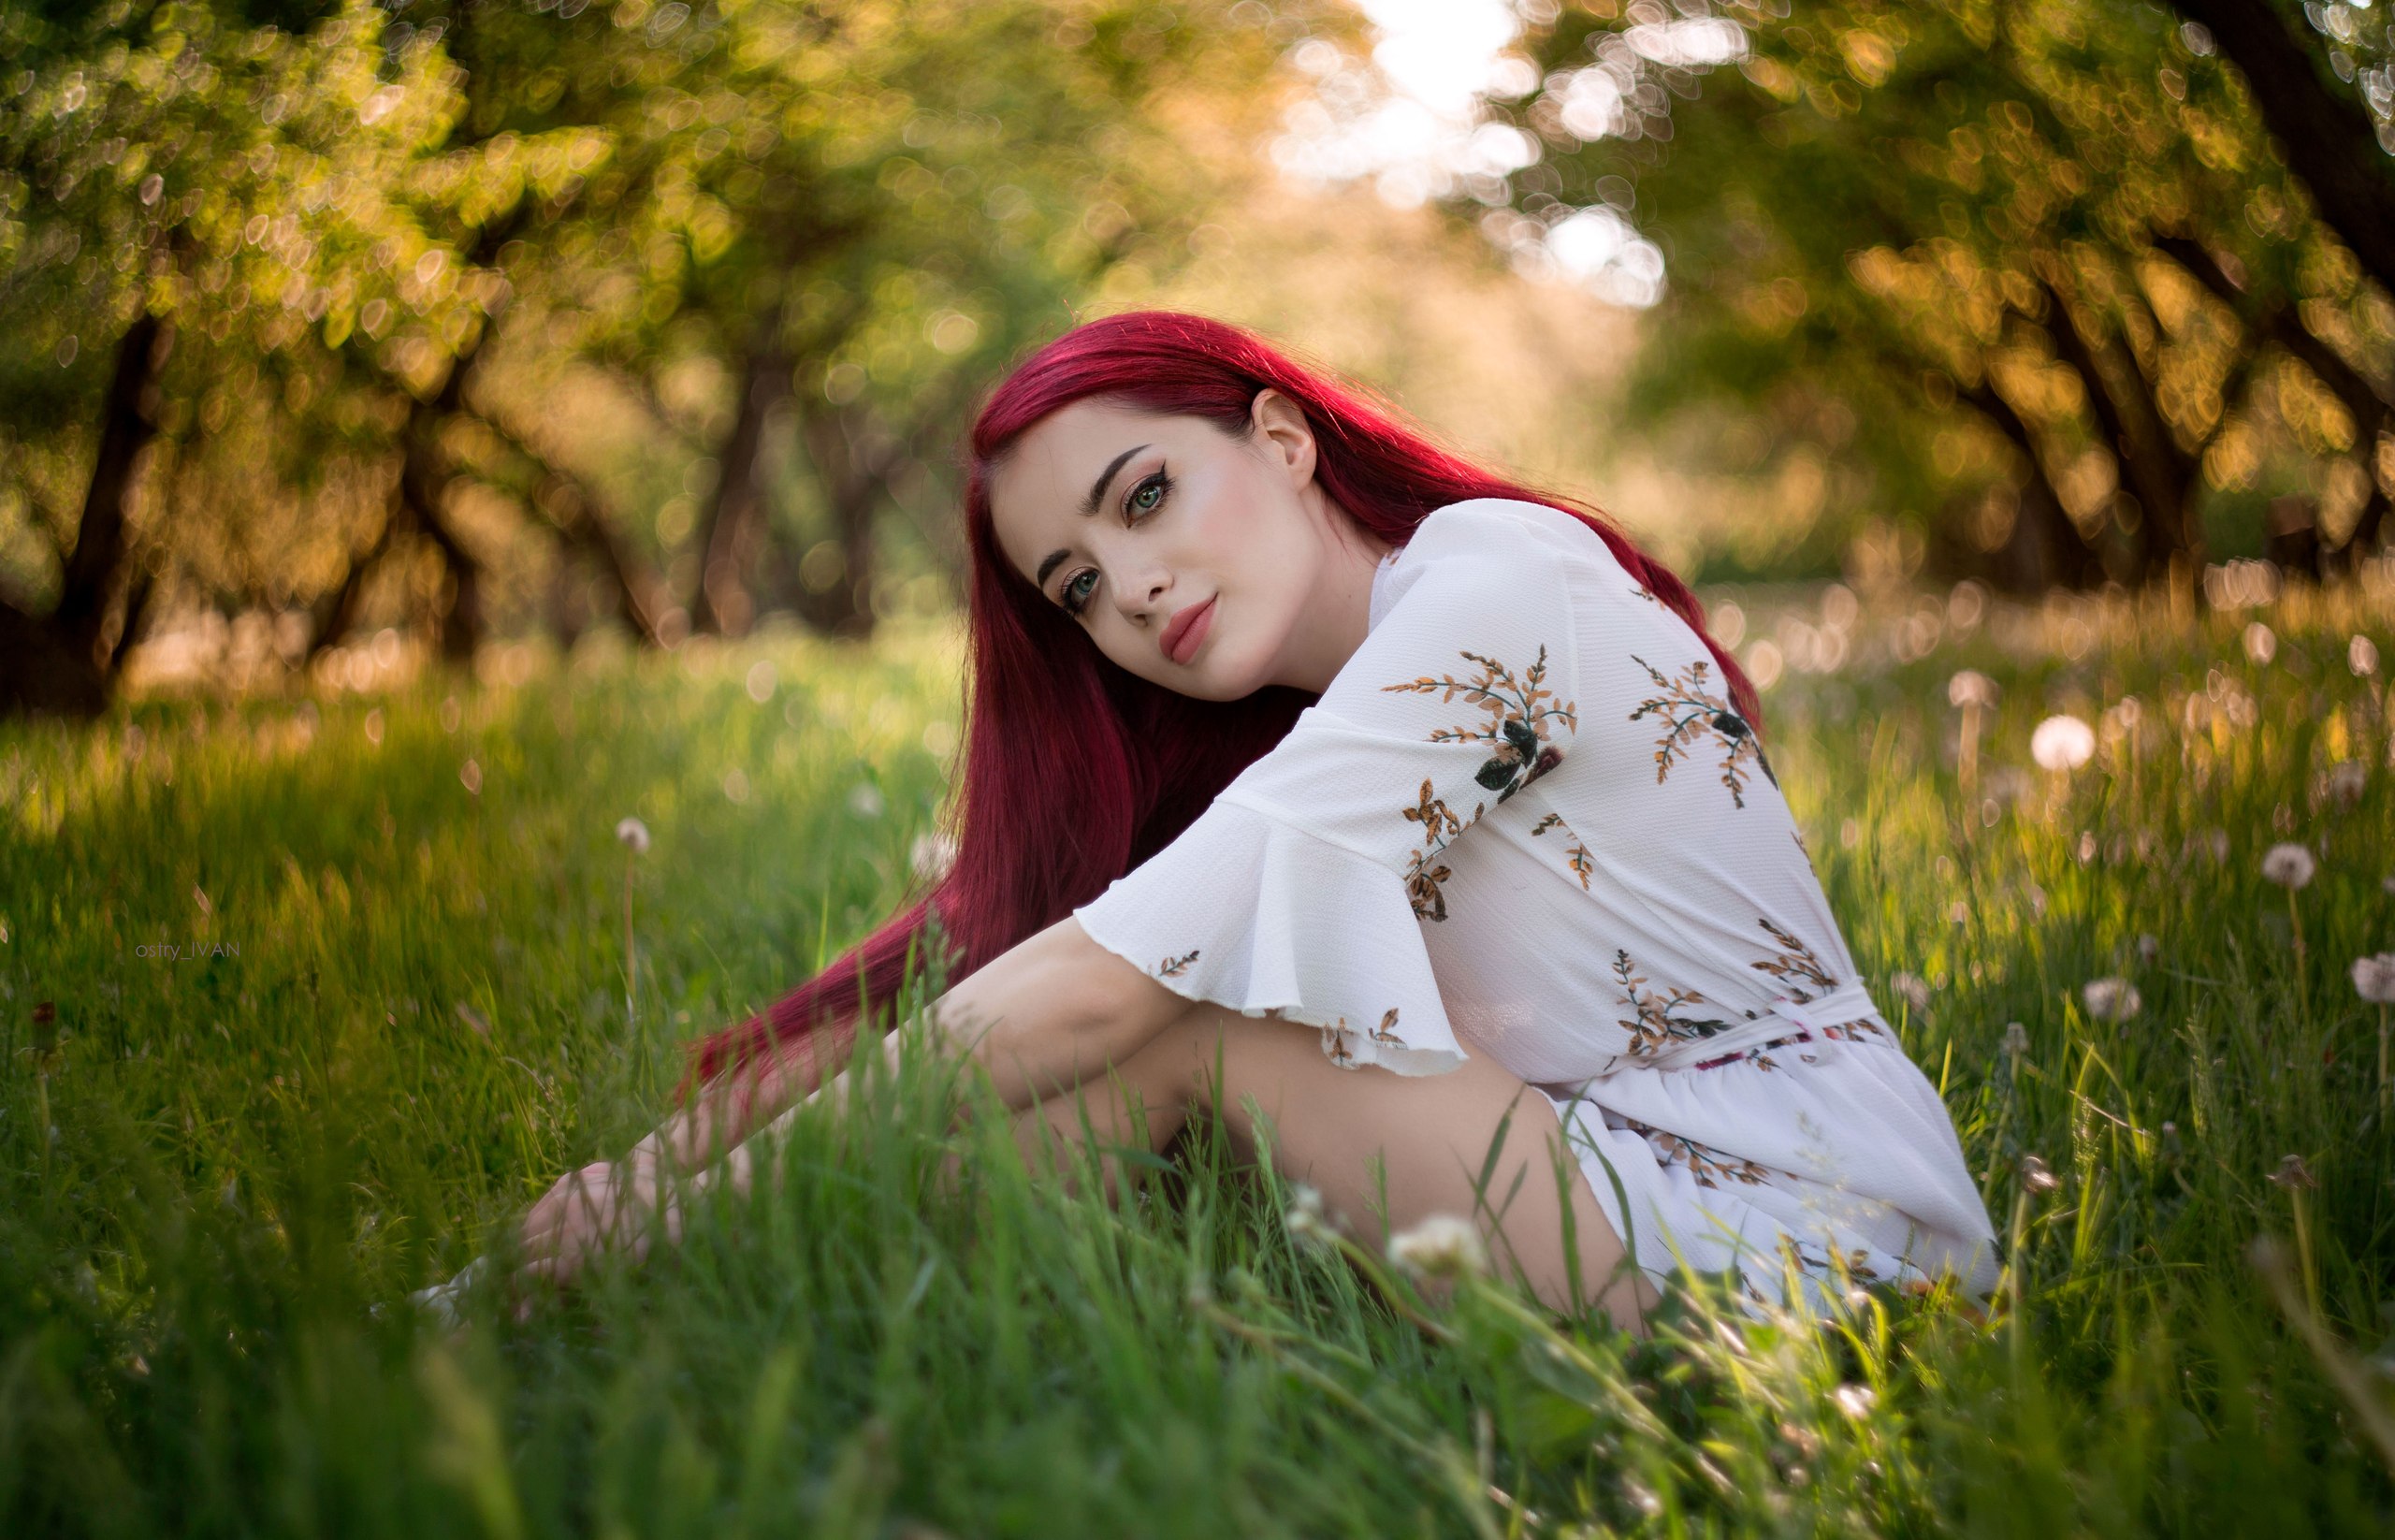 Women Model Redhead Dyed Hair Outdoors Portrait Looking At Viewer Dandelion Grass Trees Depth Of Fie 2560x1646